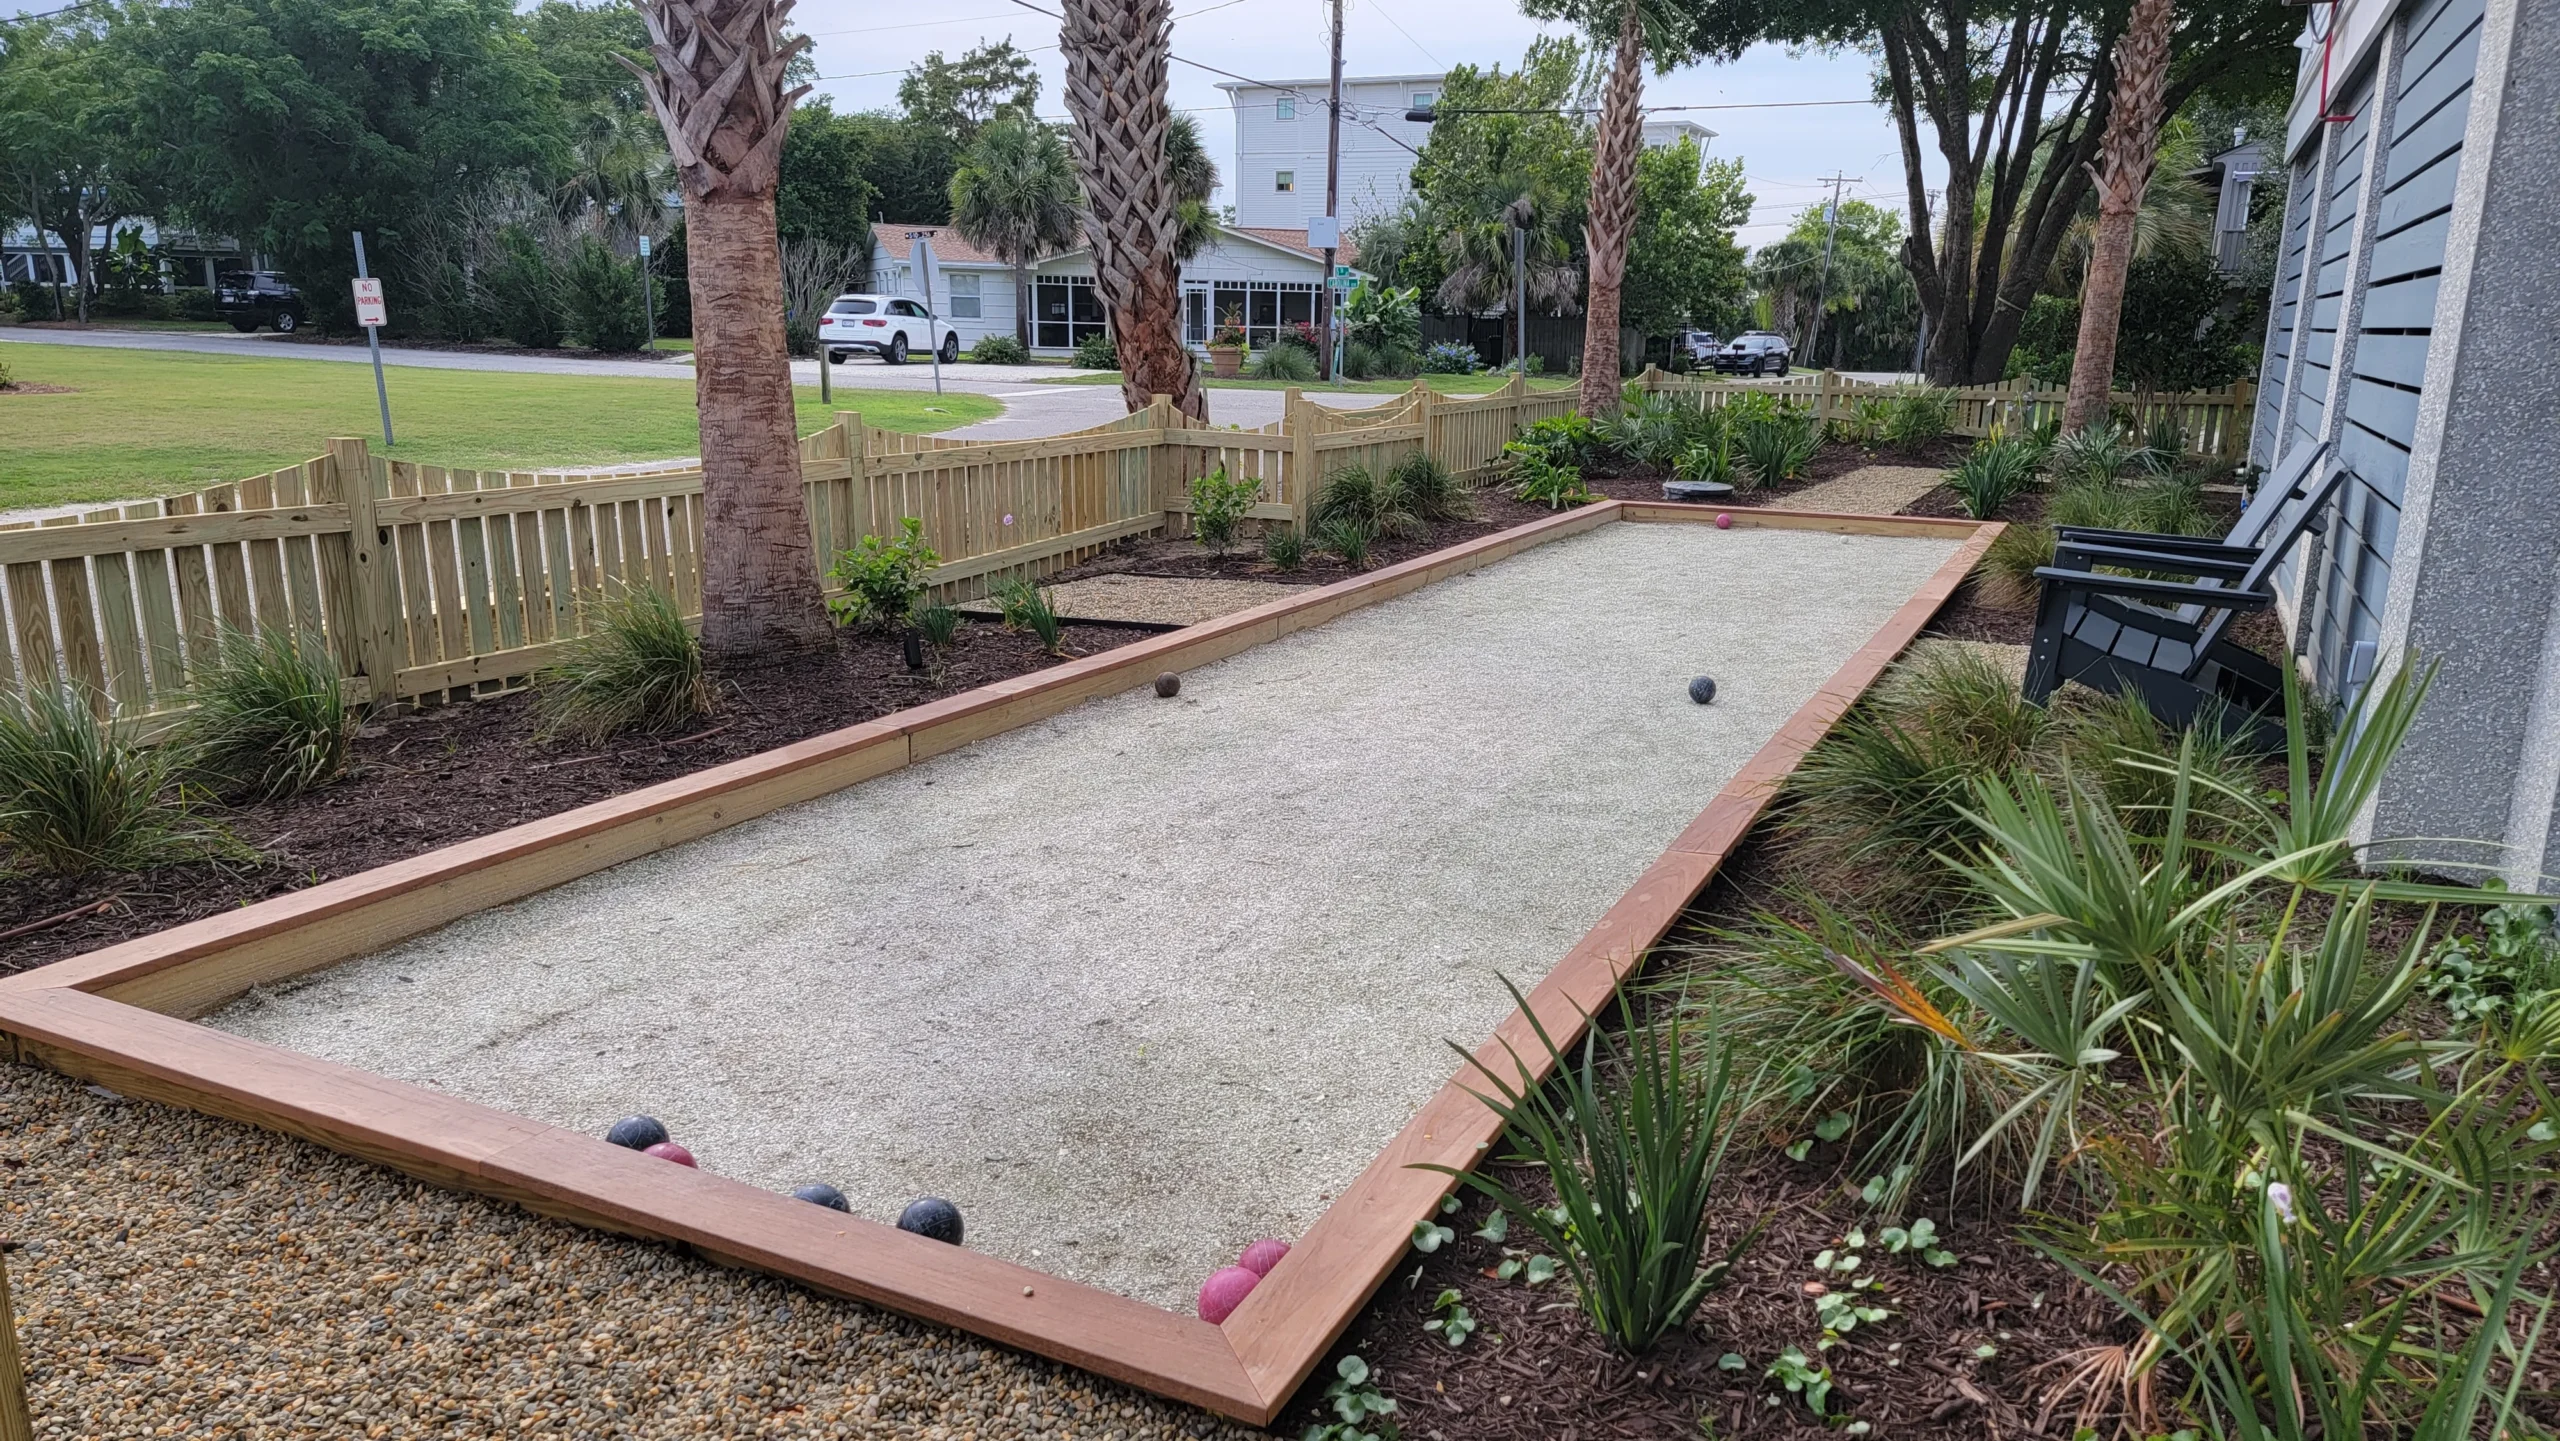 The Game of Bocce